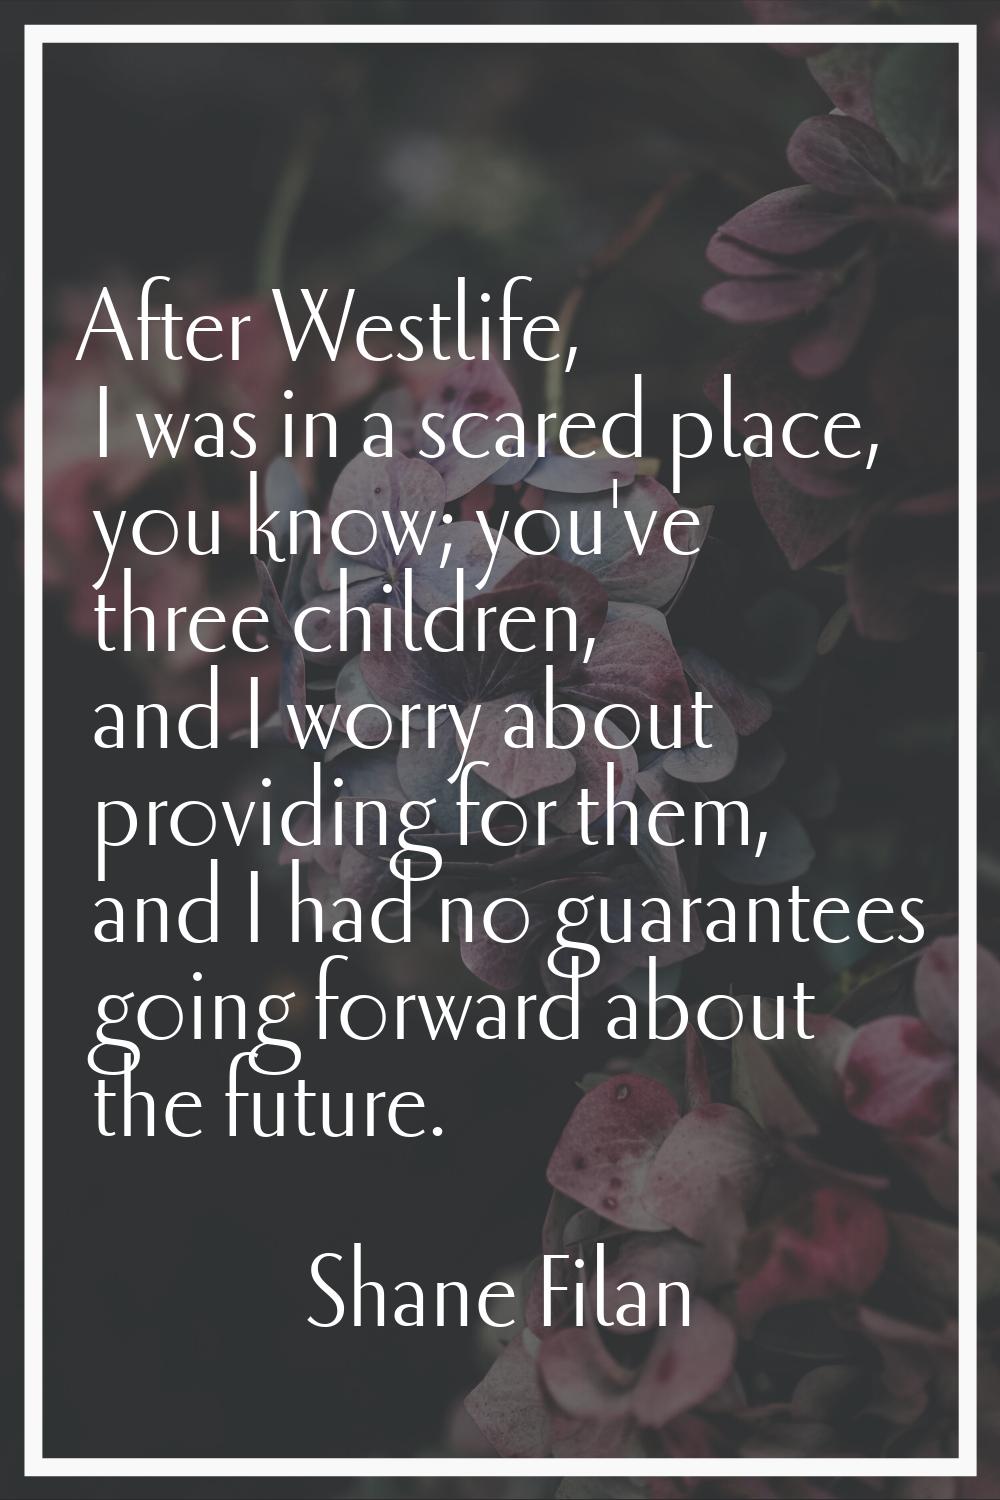 After Westlife, I was in a scared place, you know; you've three children, and I worry about providi